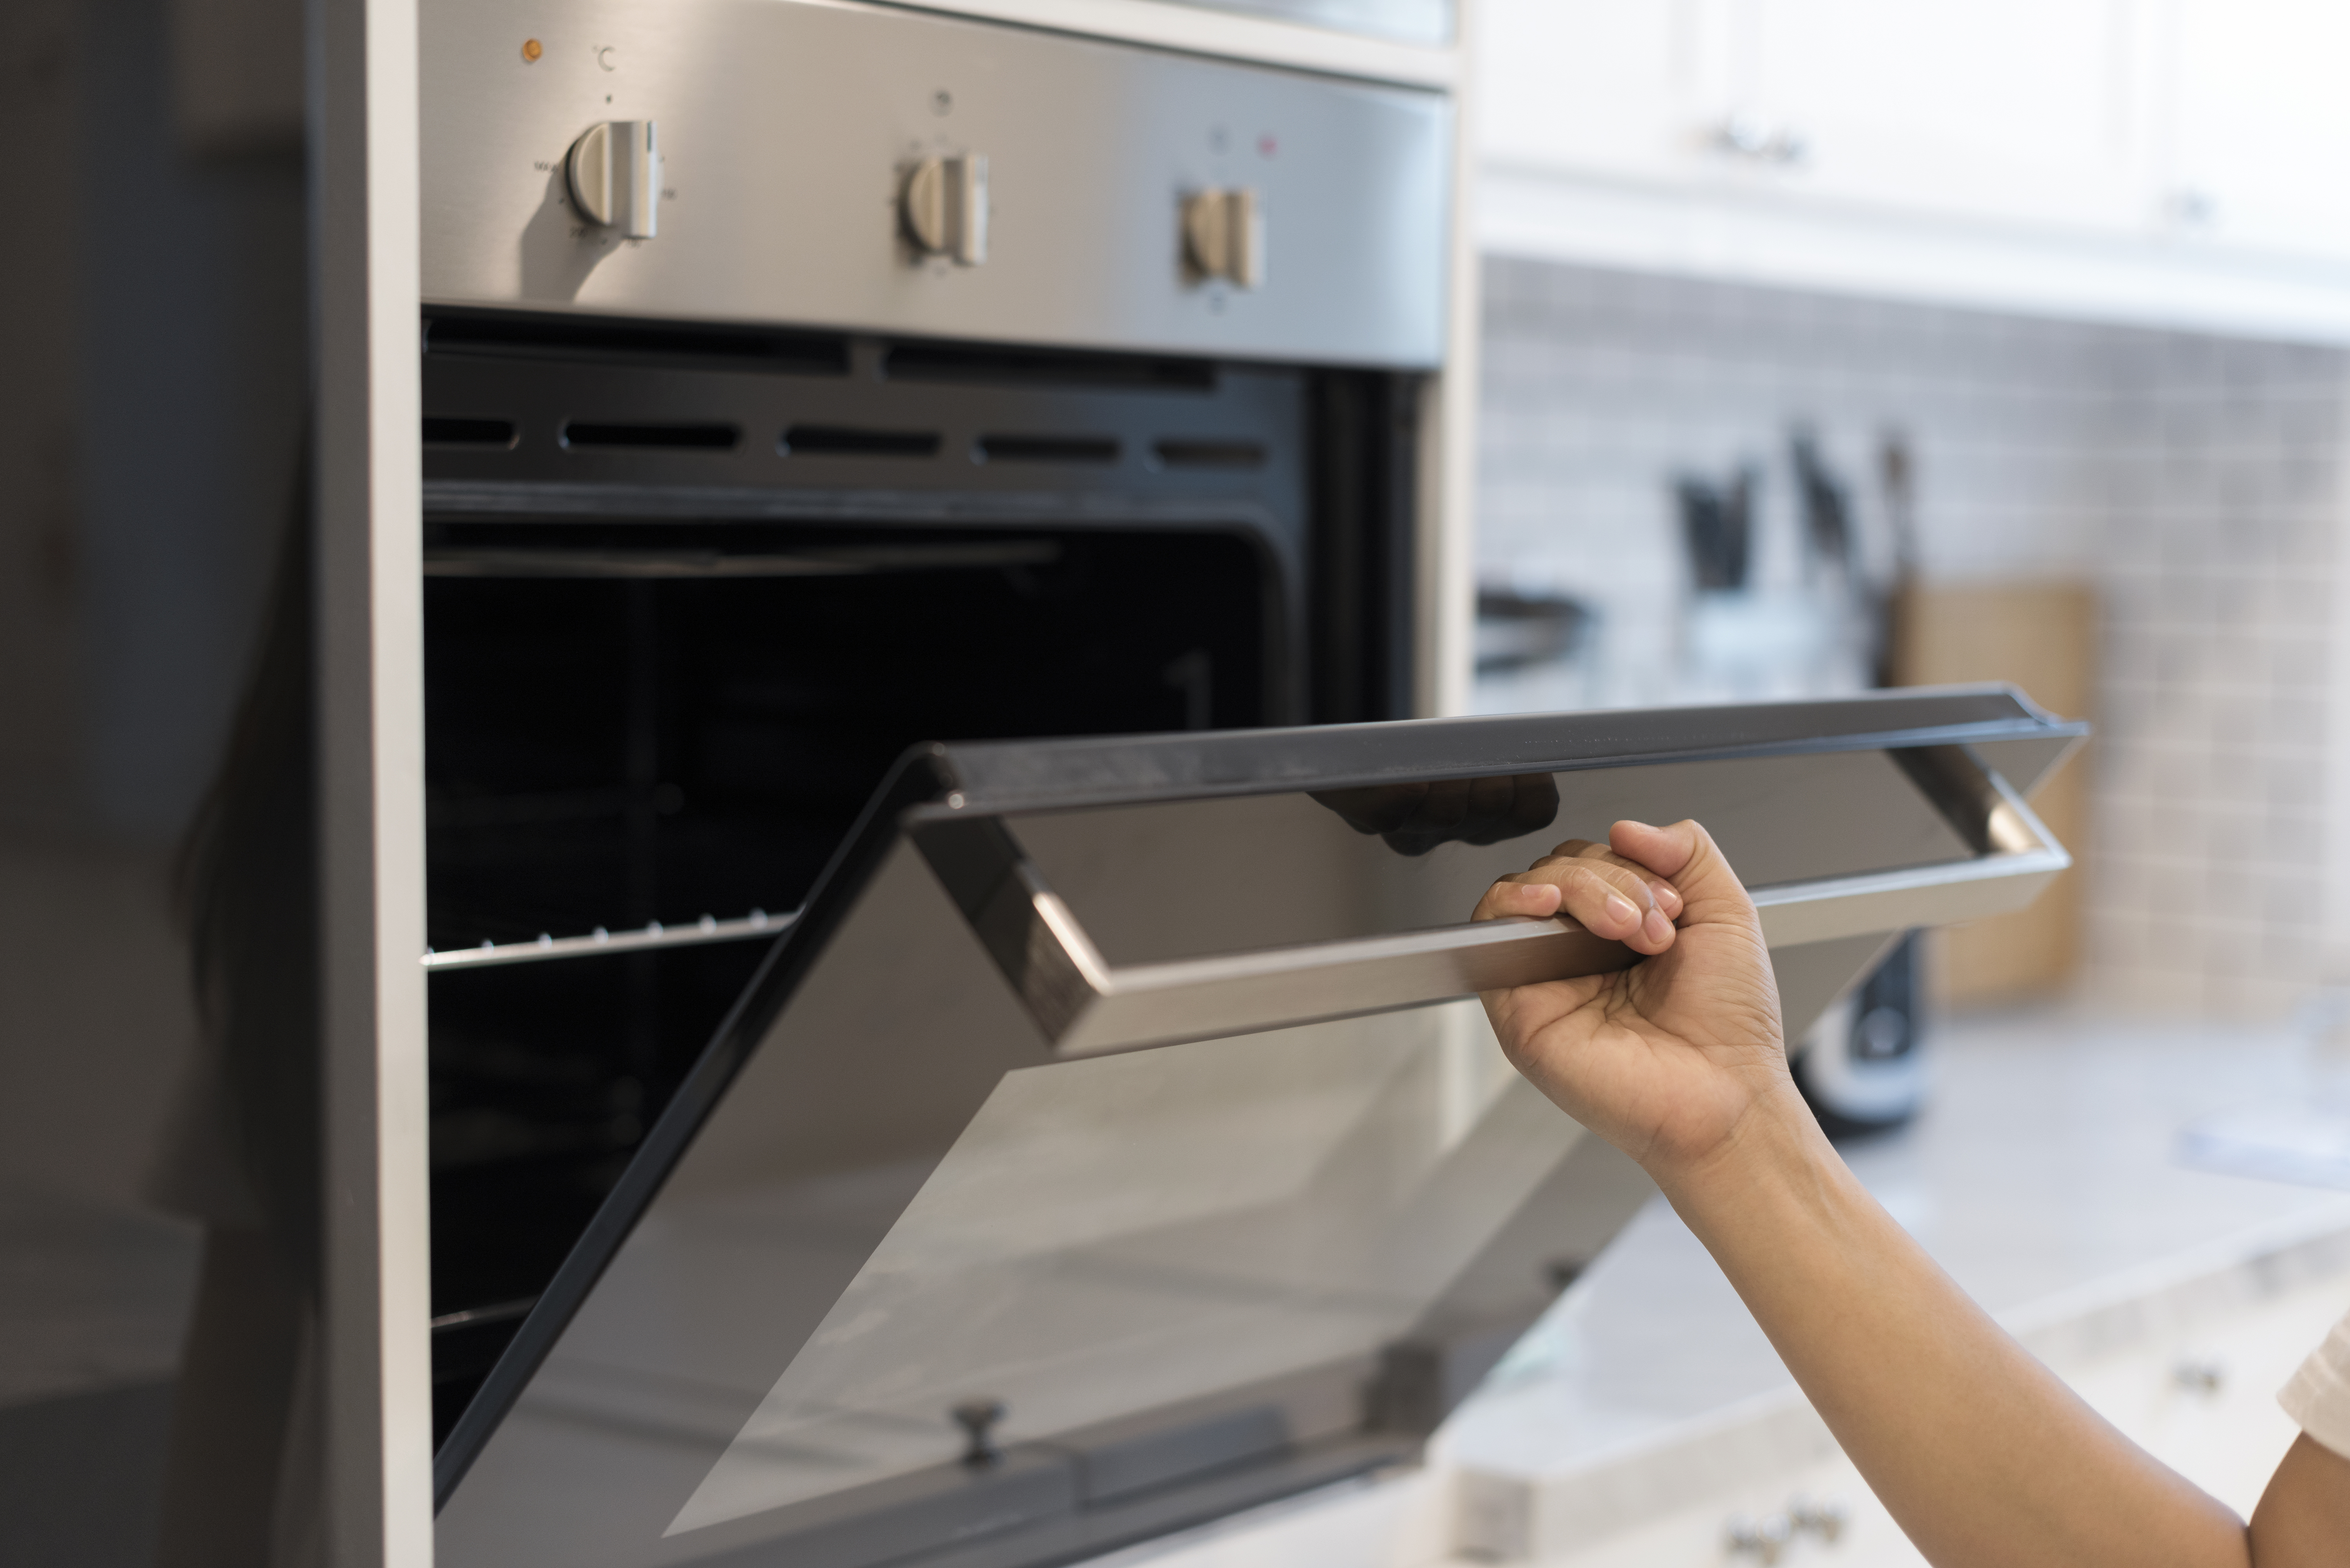 How to Calibrate Your Oven in 5 Steps